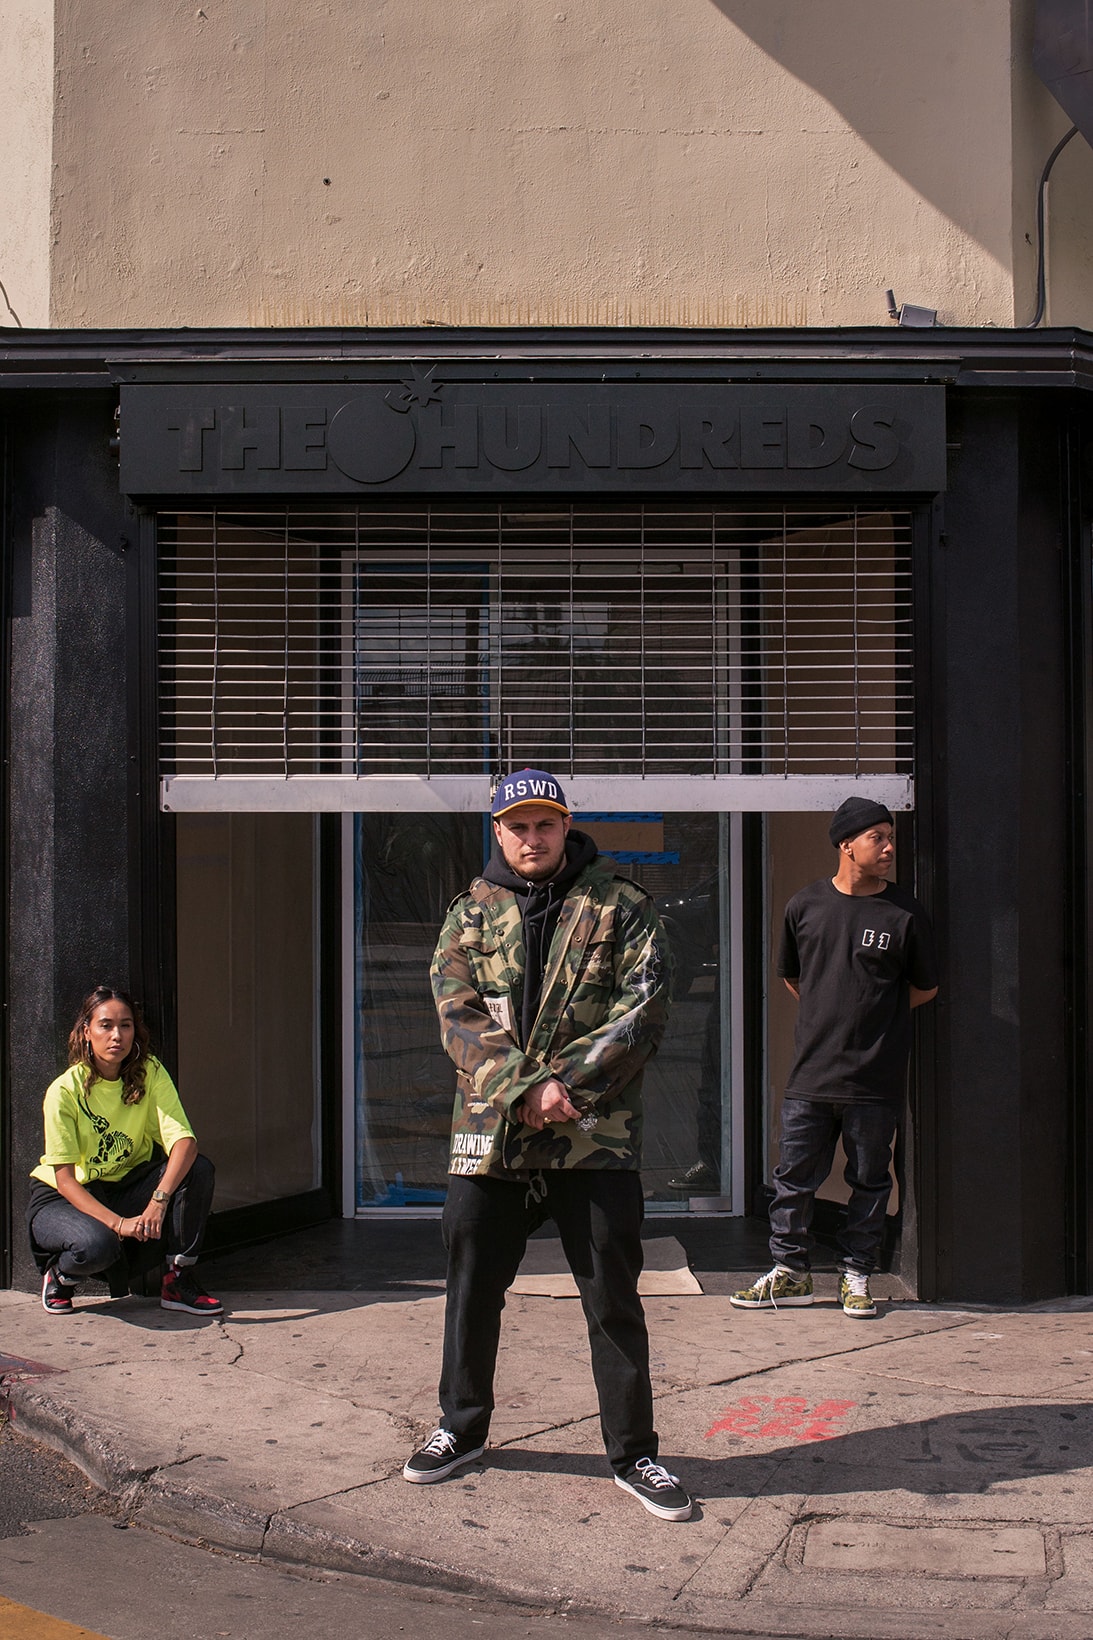 The Hundreds Opens New Los Angeles Flagship Store 2018 March 1 rosewood limited edition capsule collection drop release spring